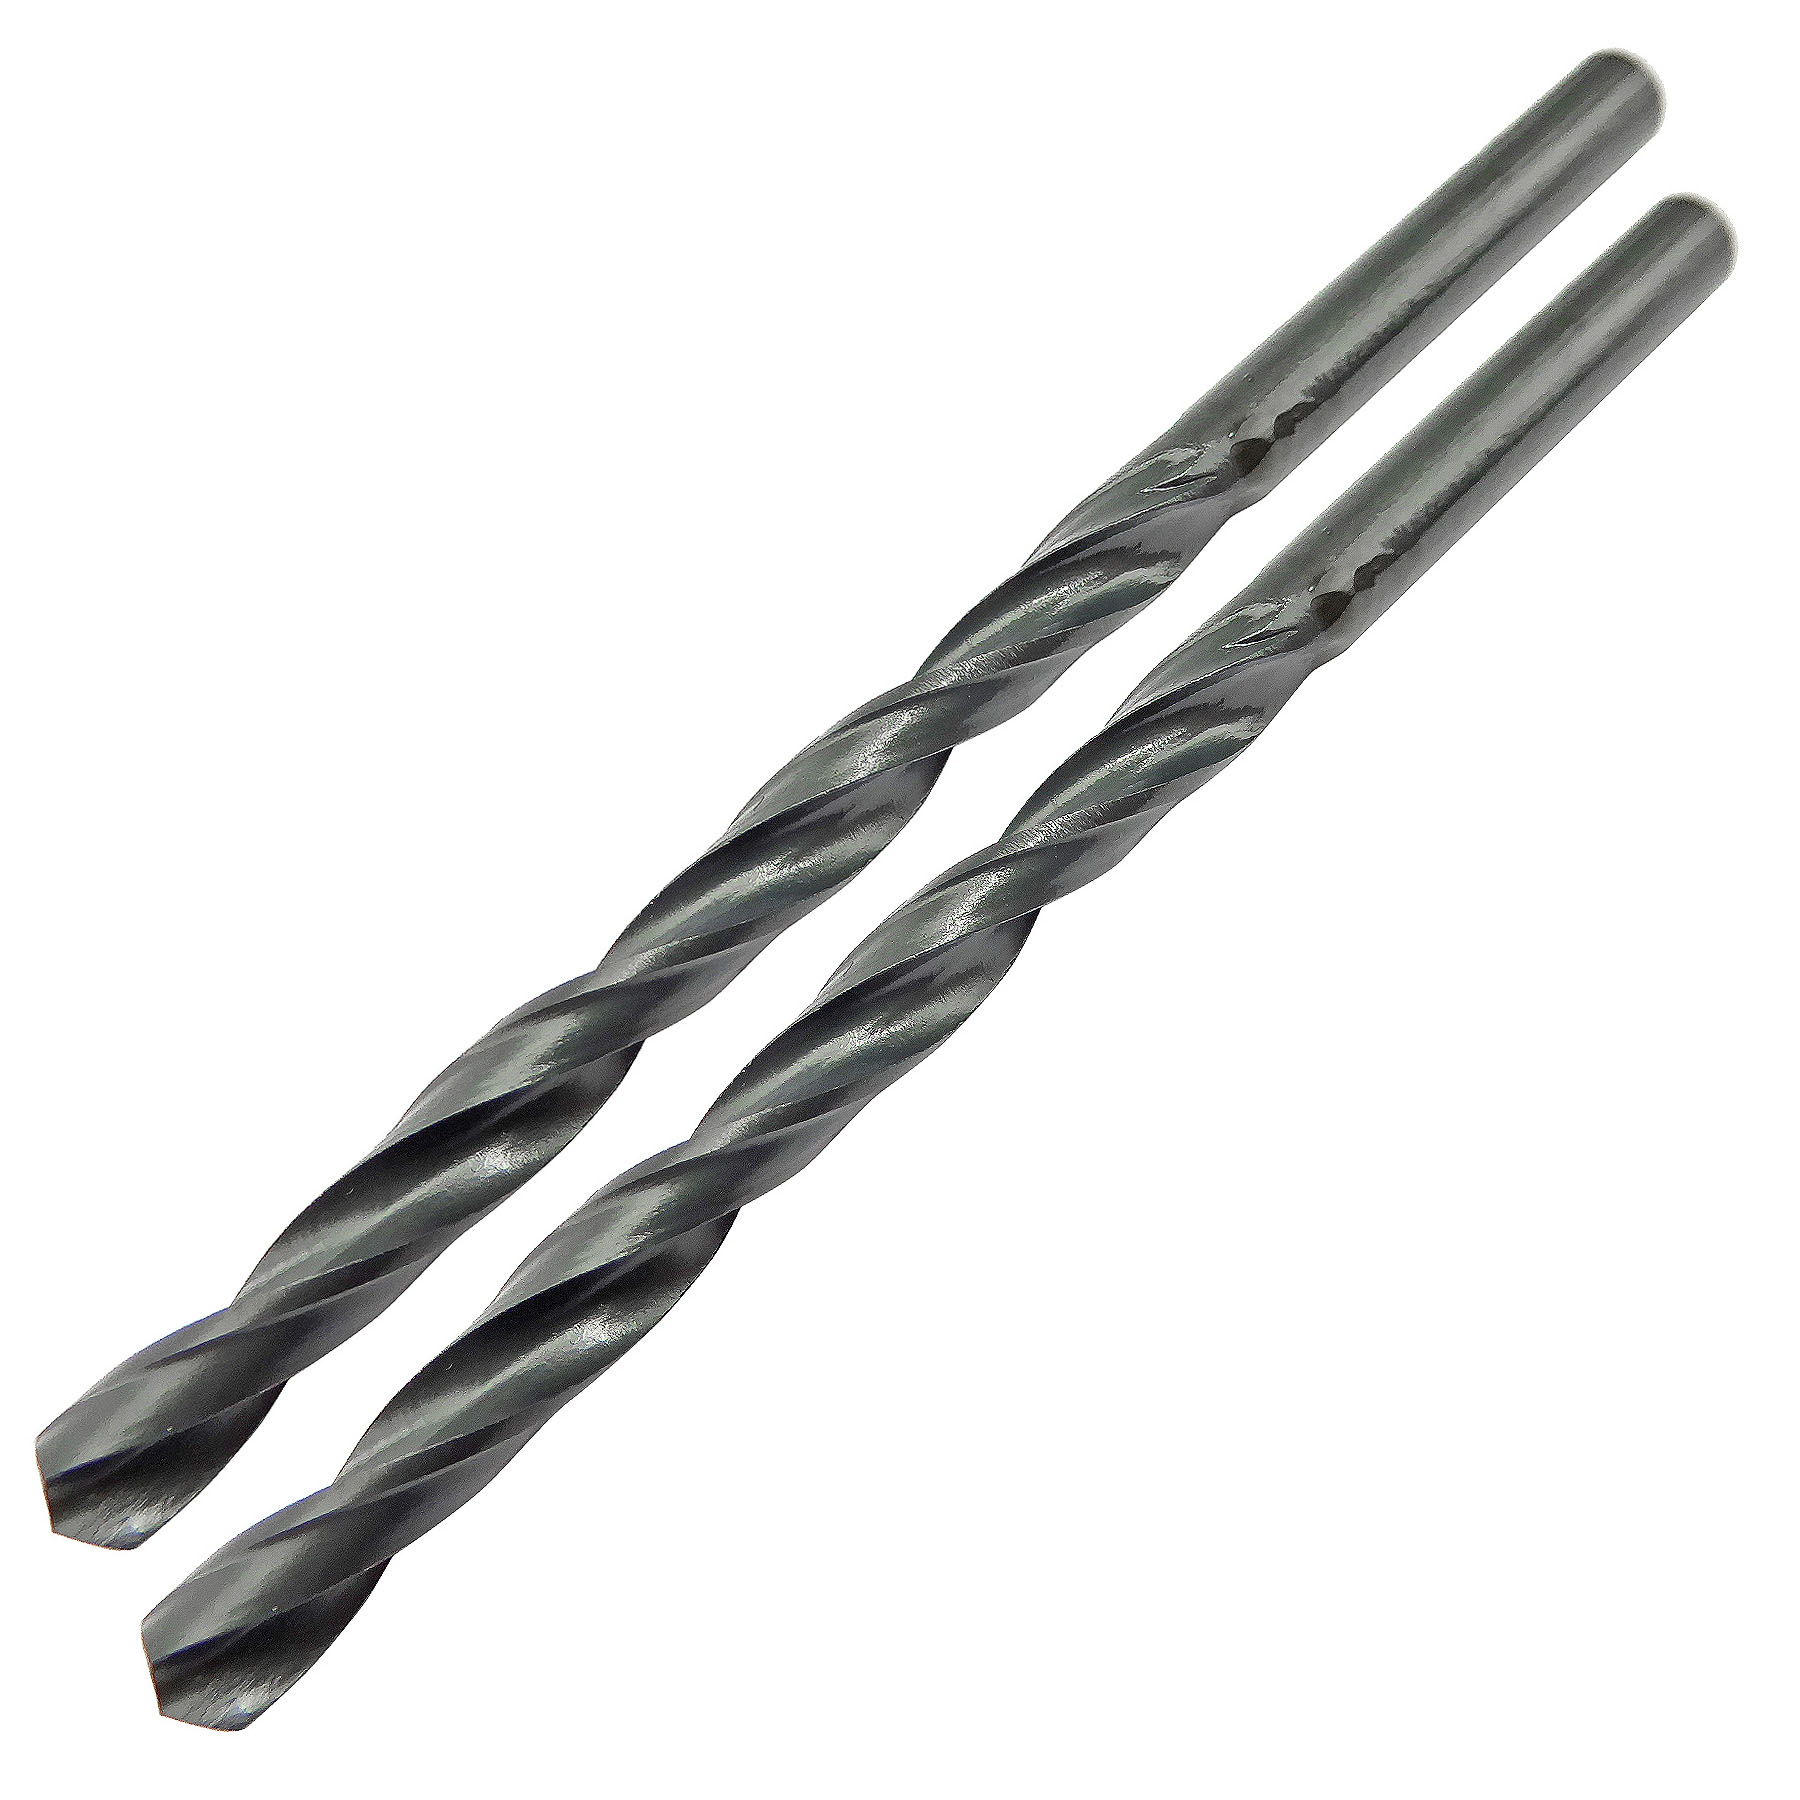 5.0mm x 86mm HSS Roll Forged Jobber Drill Pack of 2